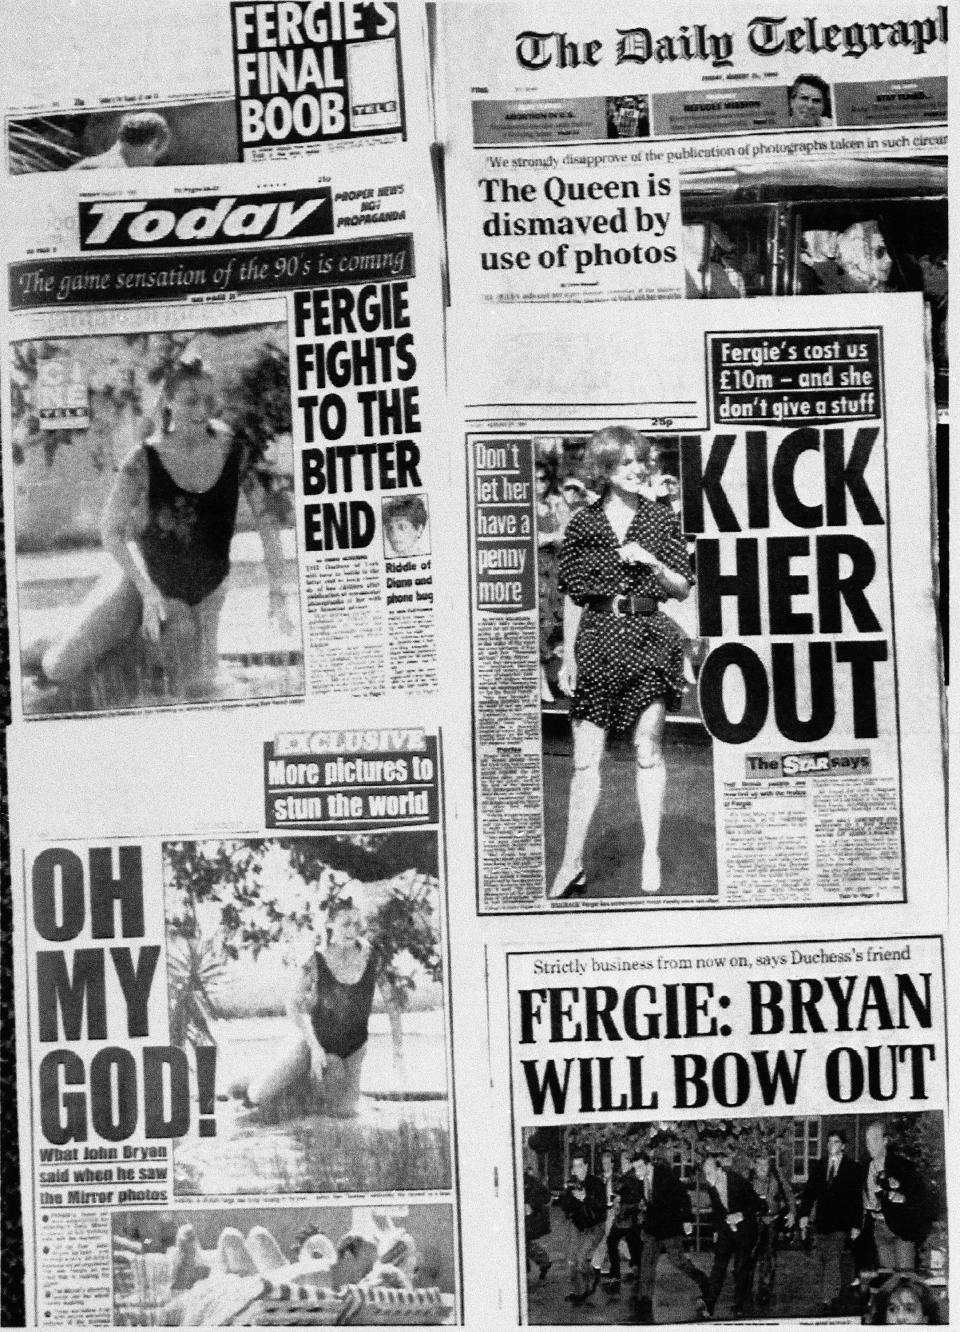 London daily papers on August 20, 1992 - Credit: ASSOCIATED PRESS.